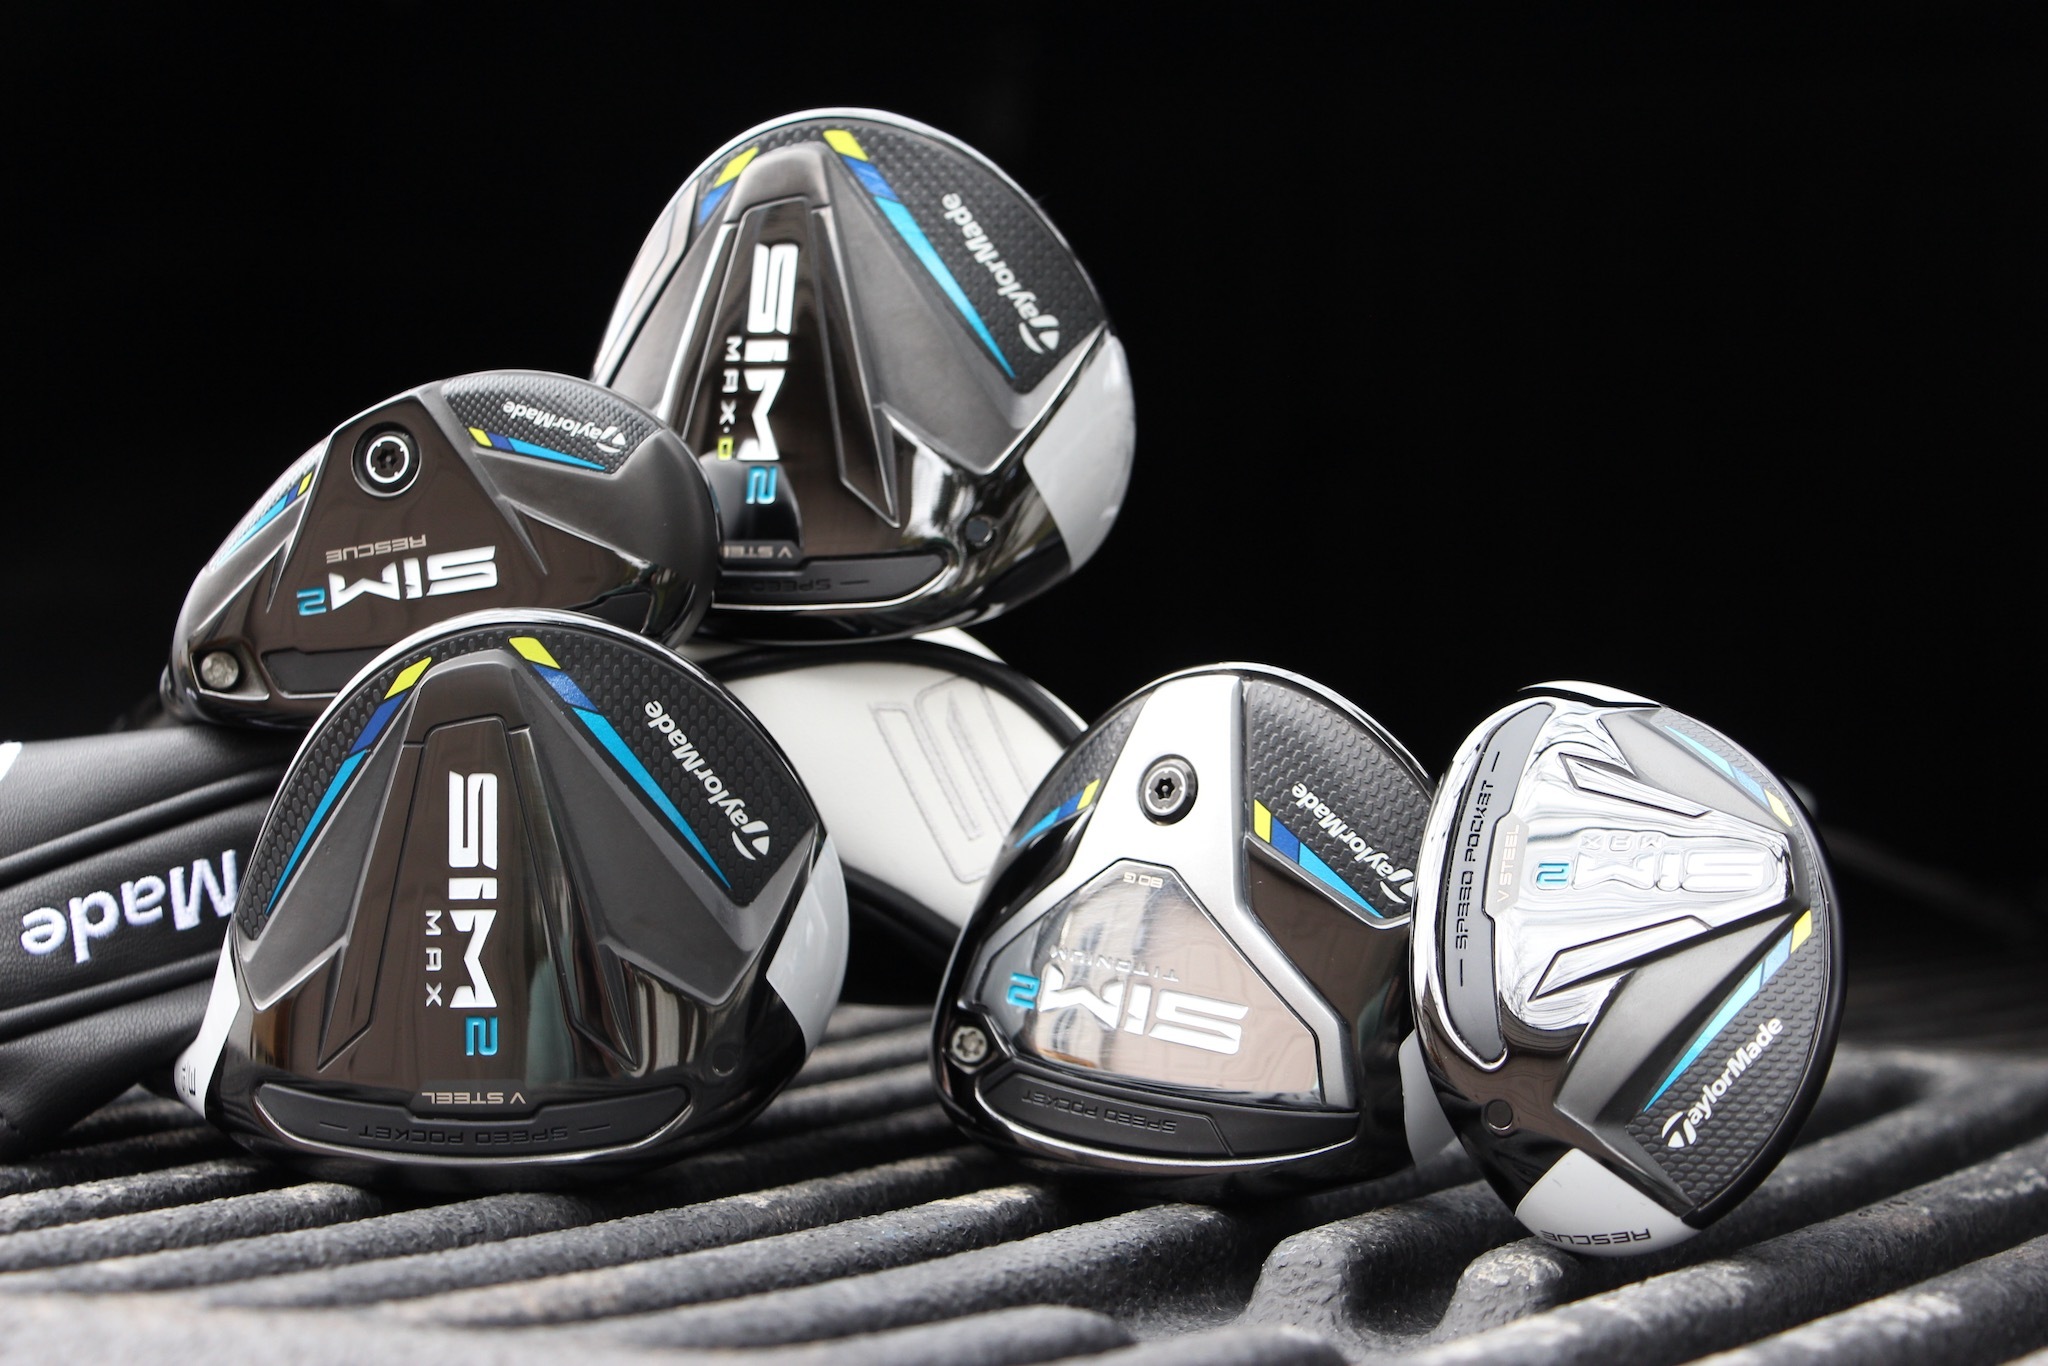 2021 TaylorMade SIM2 fairway woods and hybrids Building on a winning platform